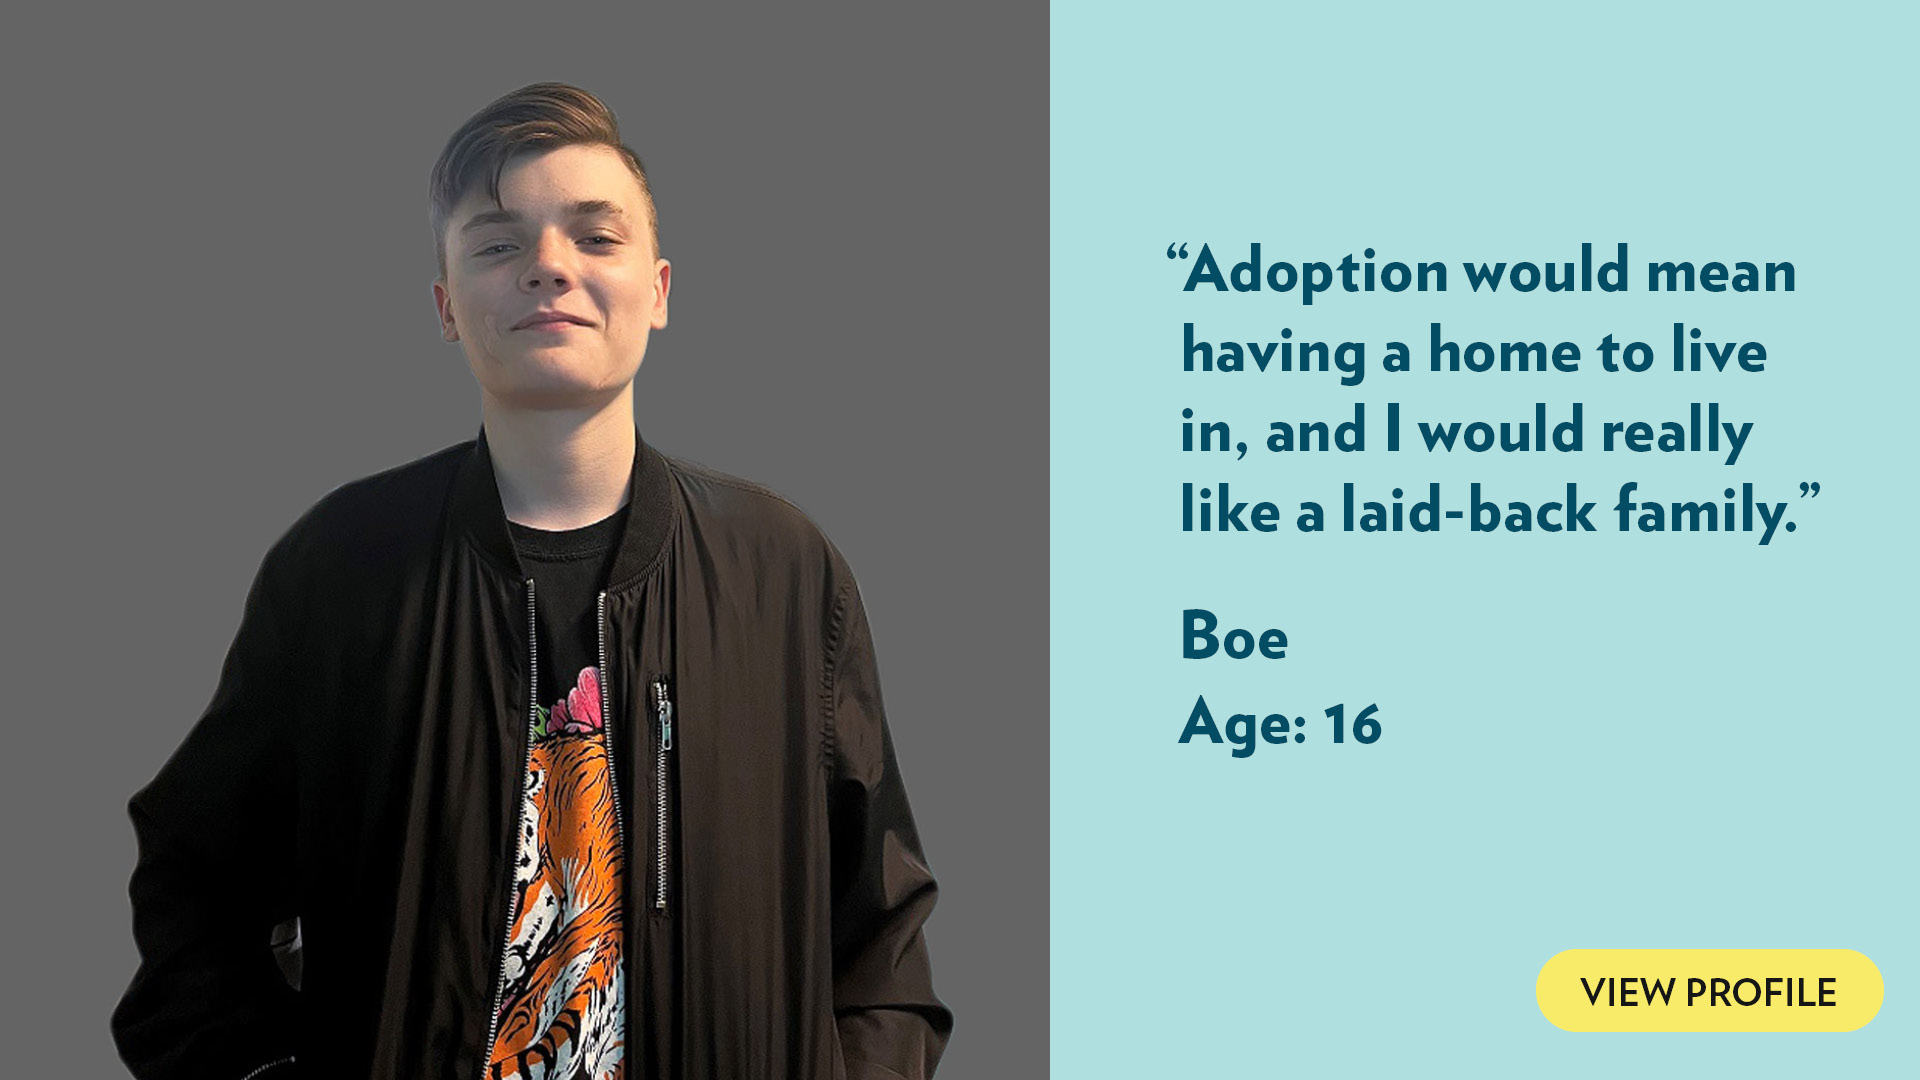 Adoption would mean having a home to live in, and I would really like a laid-back family. Boe, age 16. View profile.